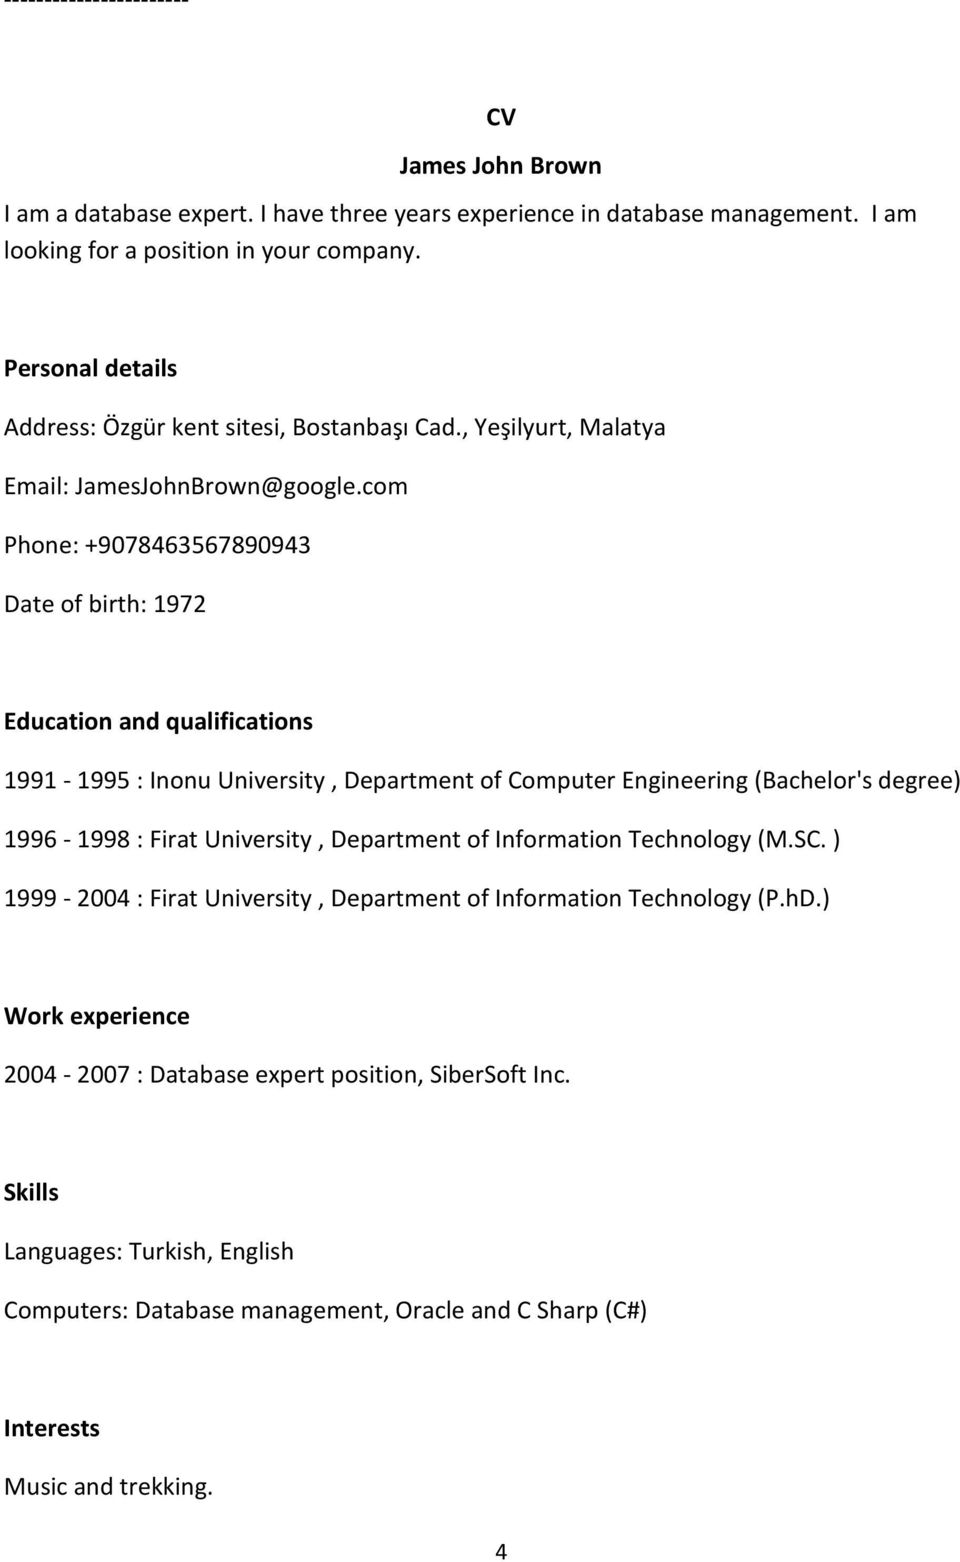 com Phone: +9078463567890943 Date of birth: 1972 Education and qualifications 1991-1995 : Inonu University, Department of Computer Engineering (Bachelor's degree) 1996-1998 : Firat University,